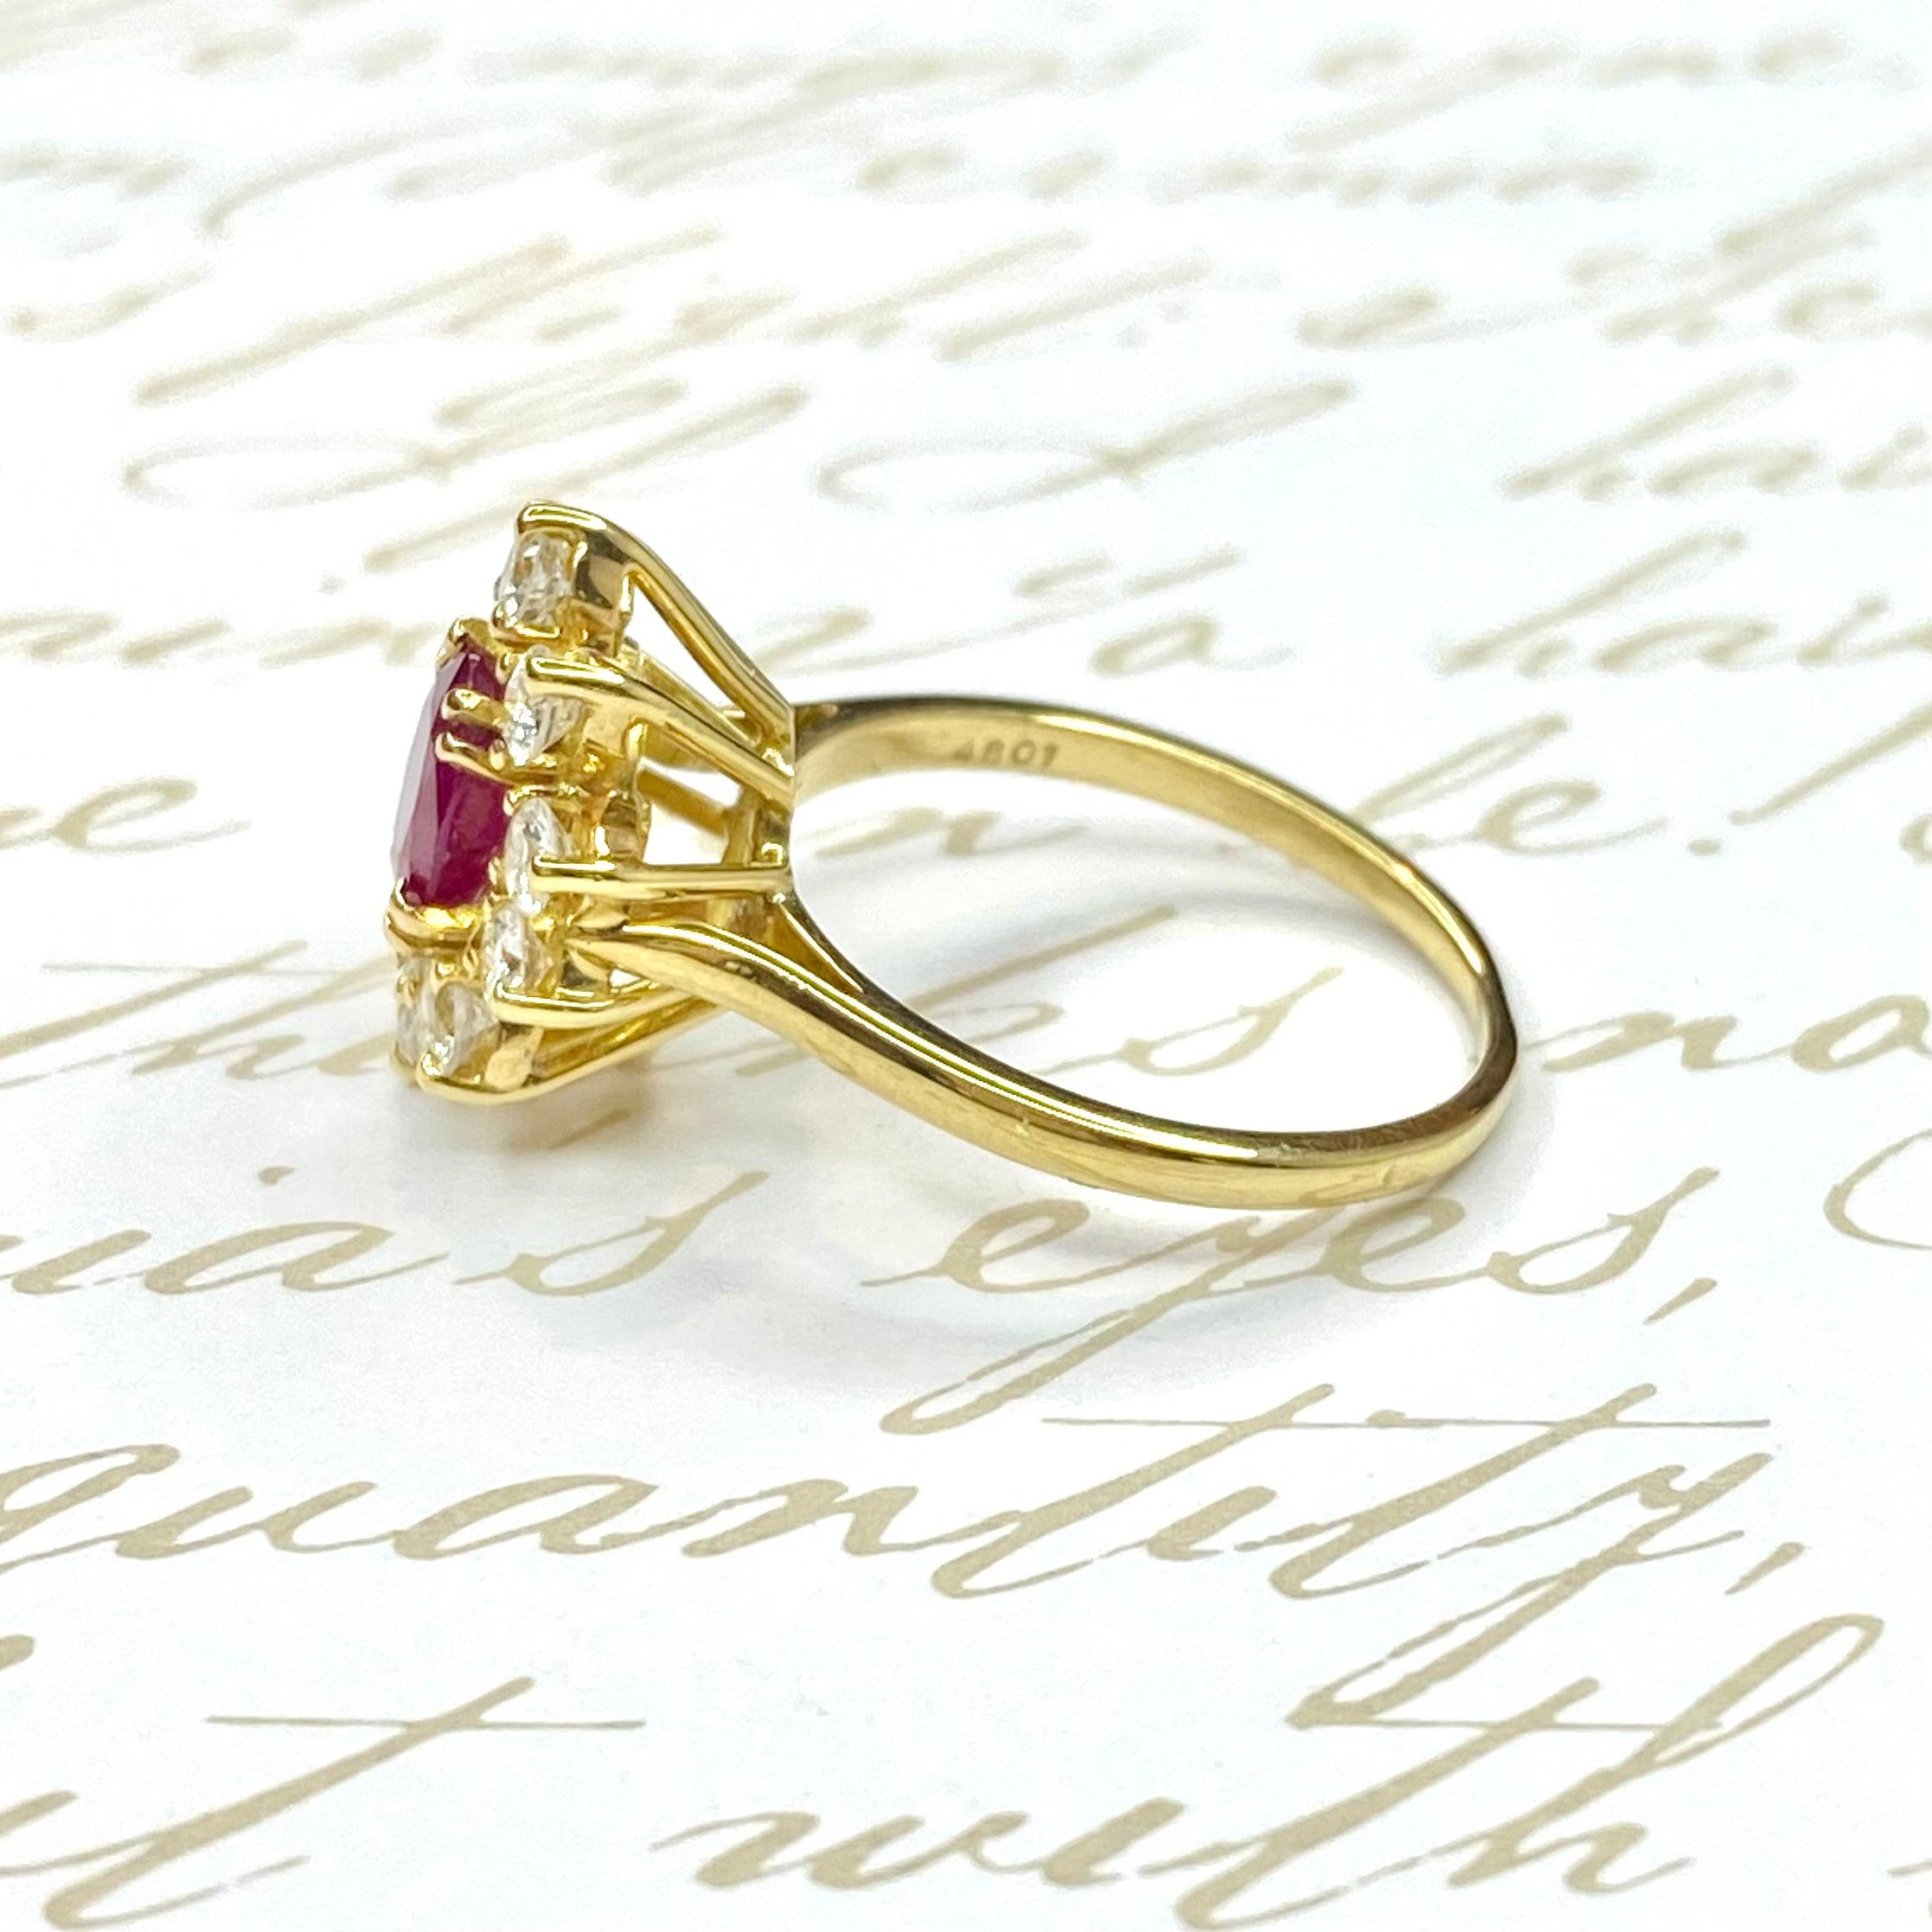 Crafted in 18K yellow gold, the ring features an oval GIA certified Burmese ruby set within a bezel of round brilliant cut diamonds. 
Ruby: 0.80 ct. (GIA certificate listed under images)
10 Diamonds: 0.60 ctw. Color: F-G, Clarity: